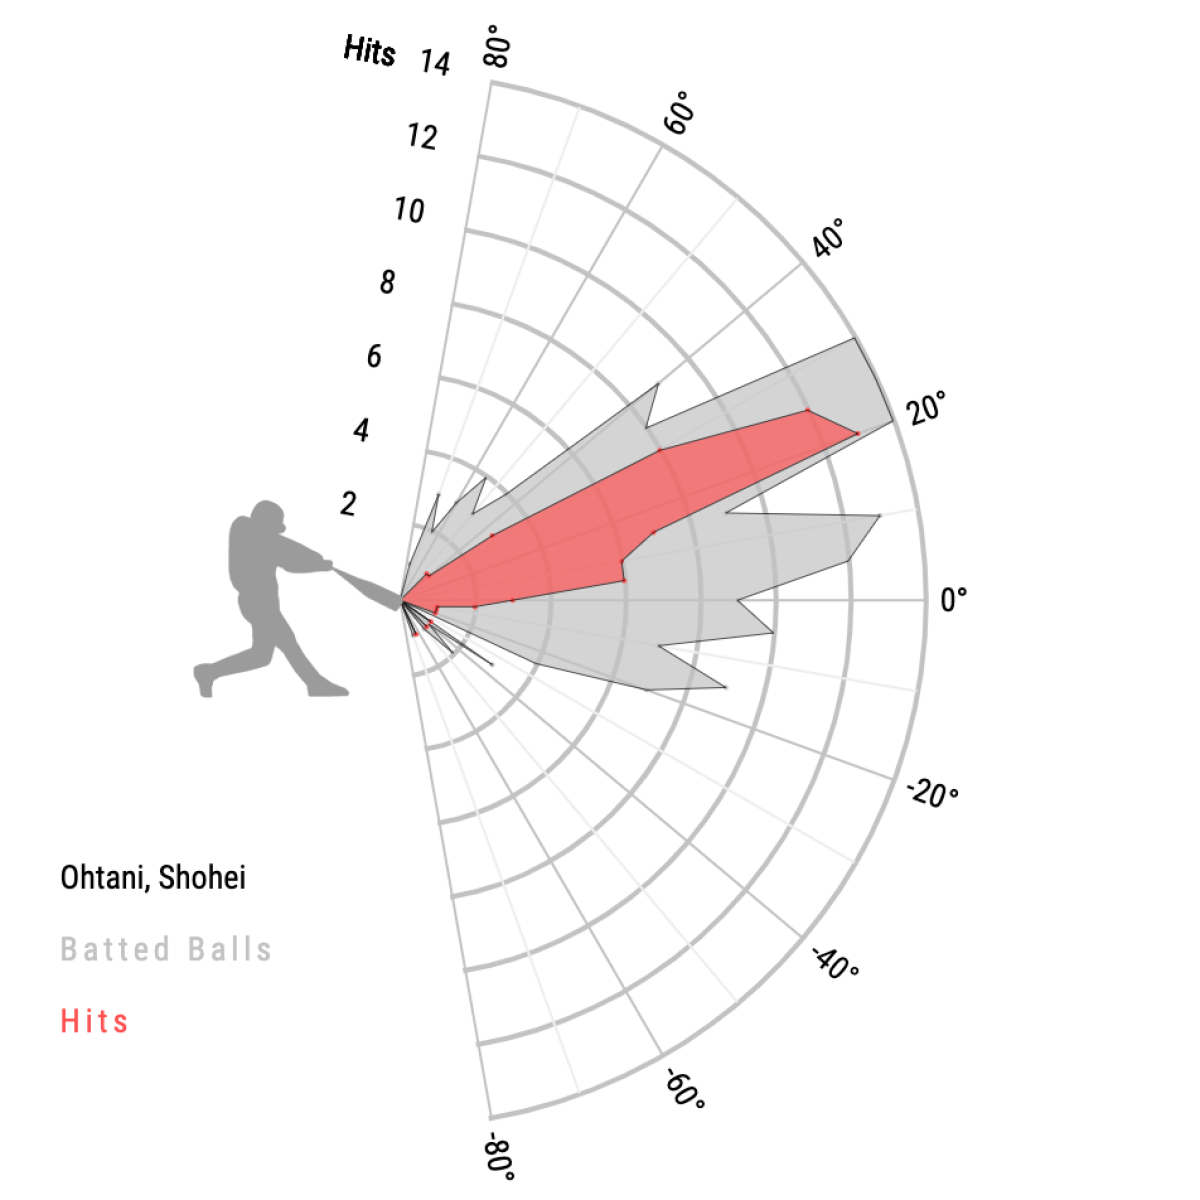 A chart showing the launch angles of balls hit by Shohei Ohtani